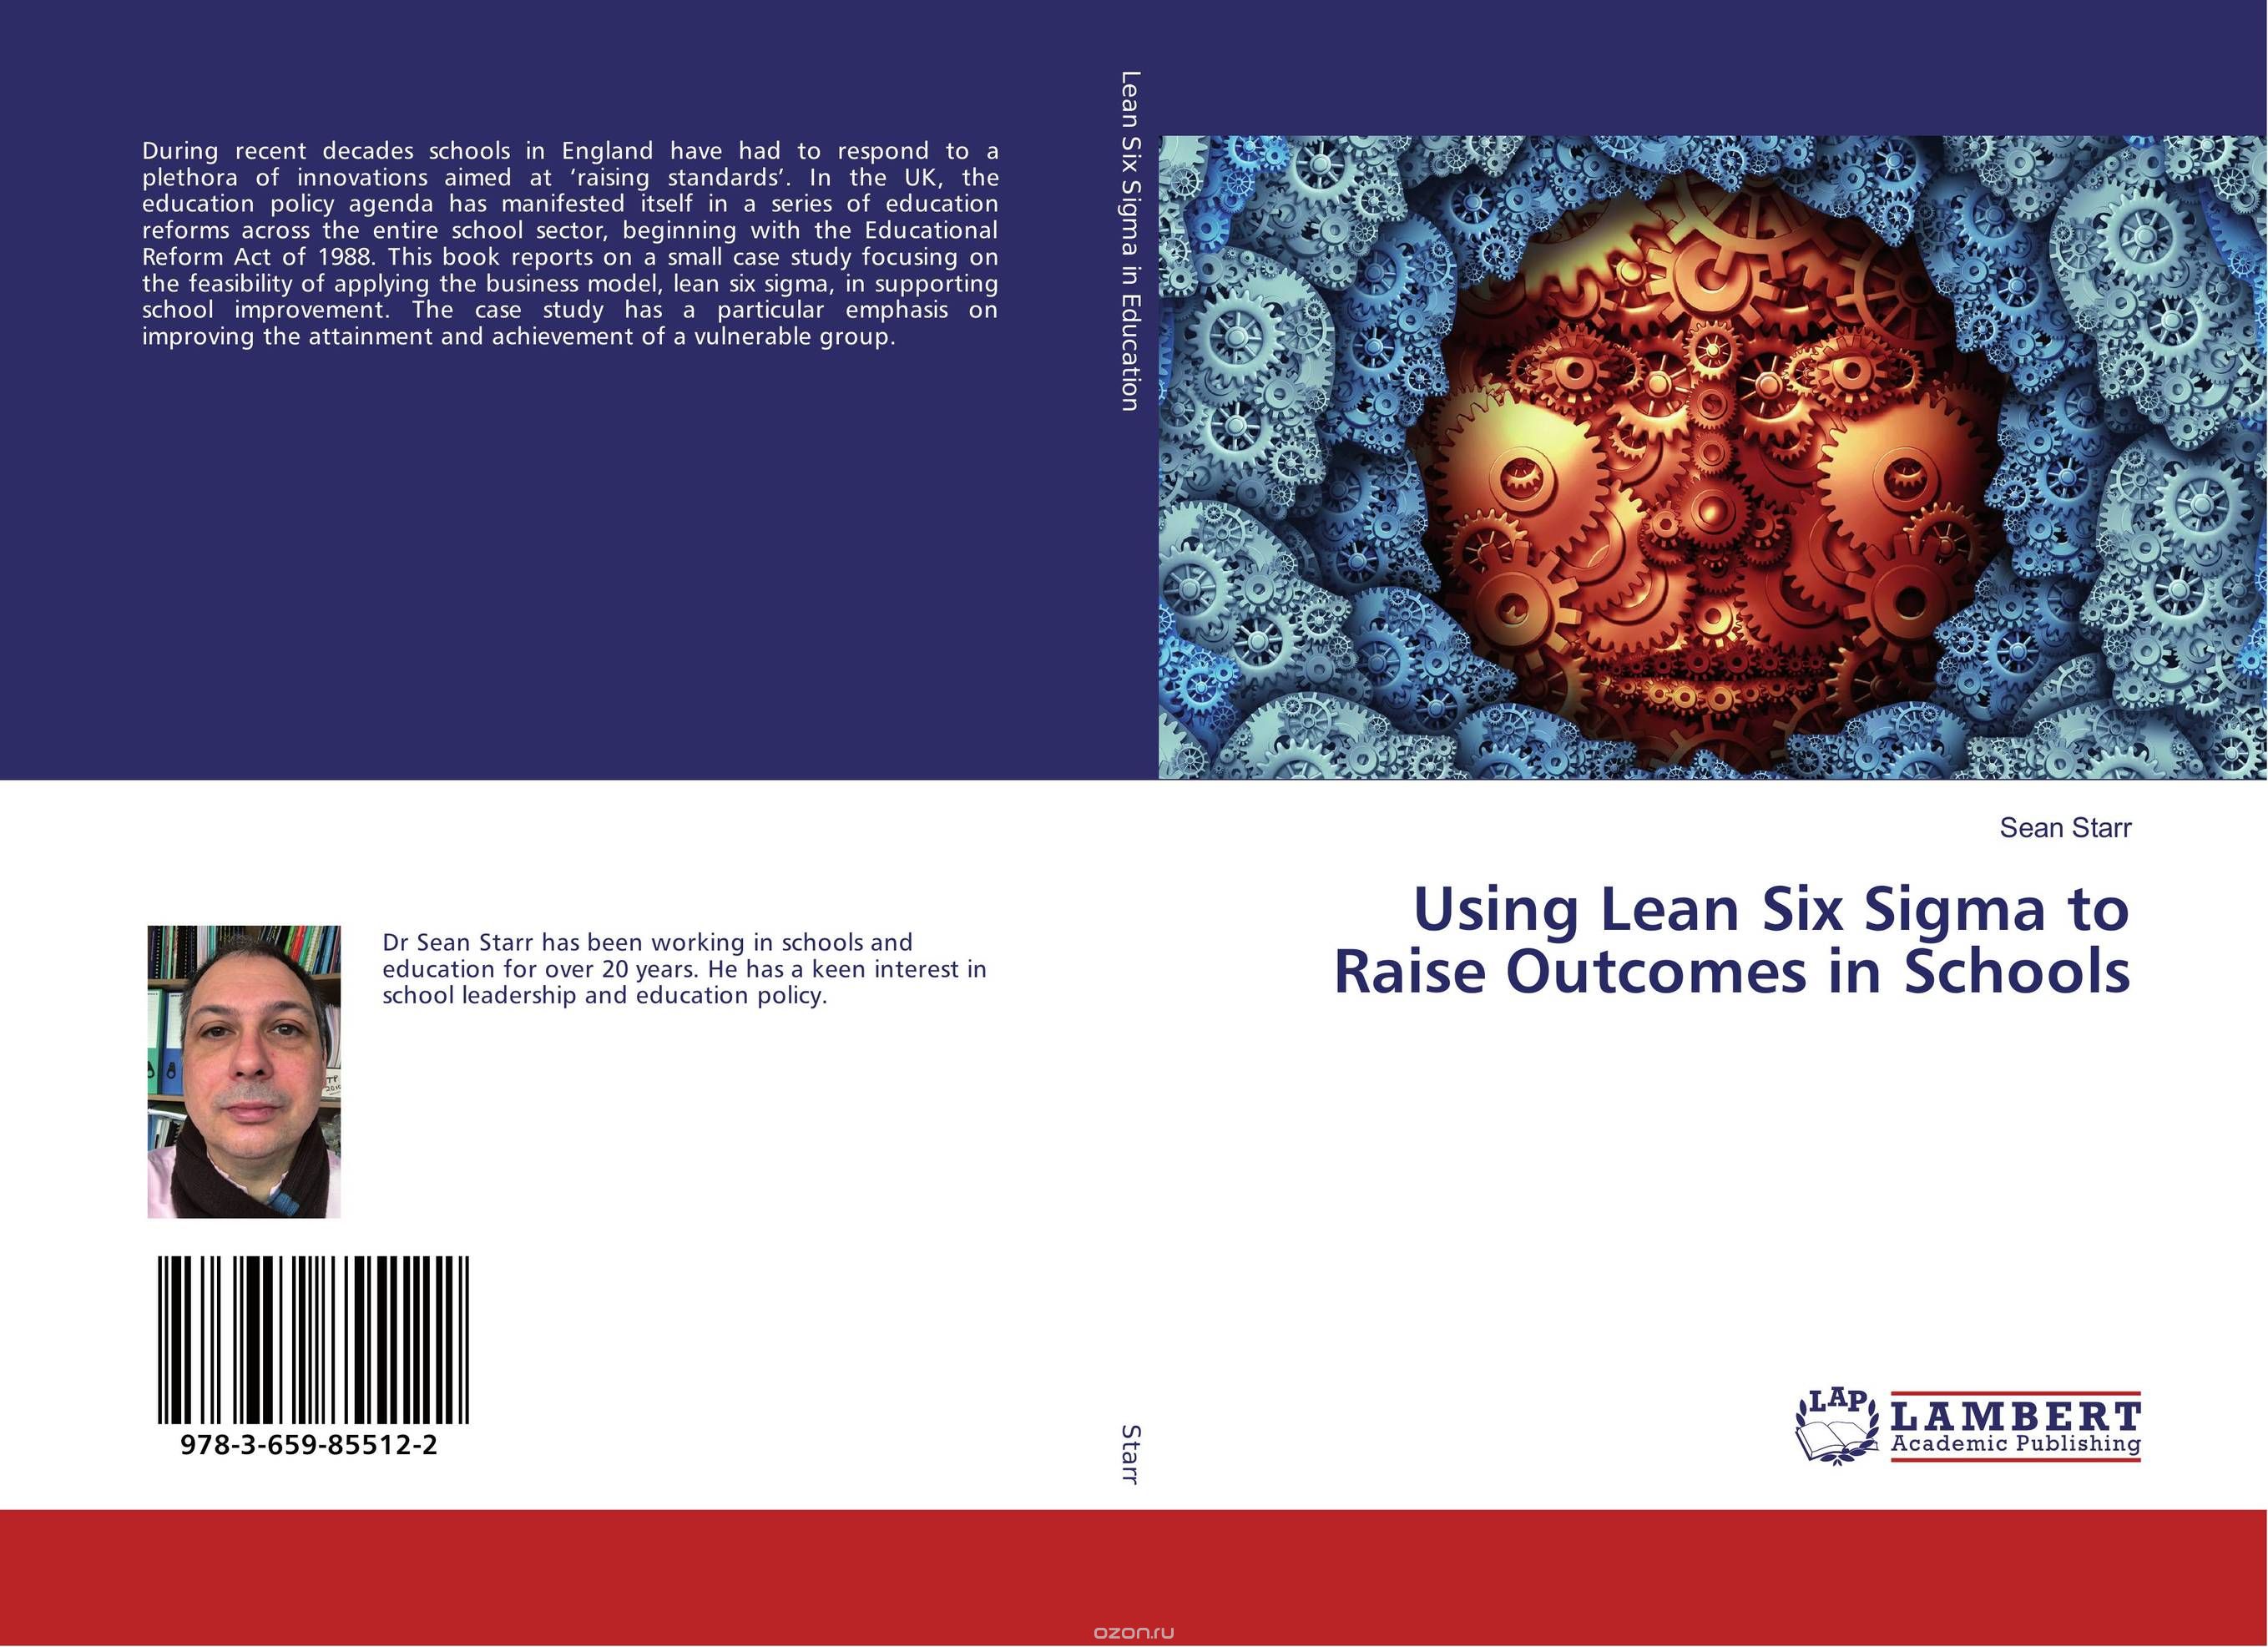 Using Lean Six Sigma to Raise Outcomes in Schools